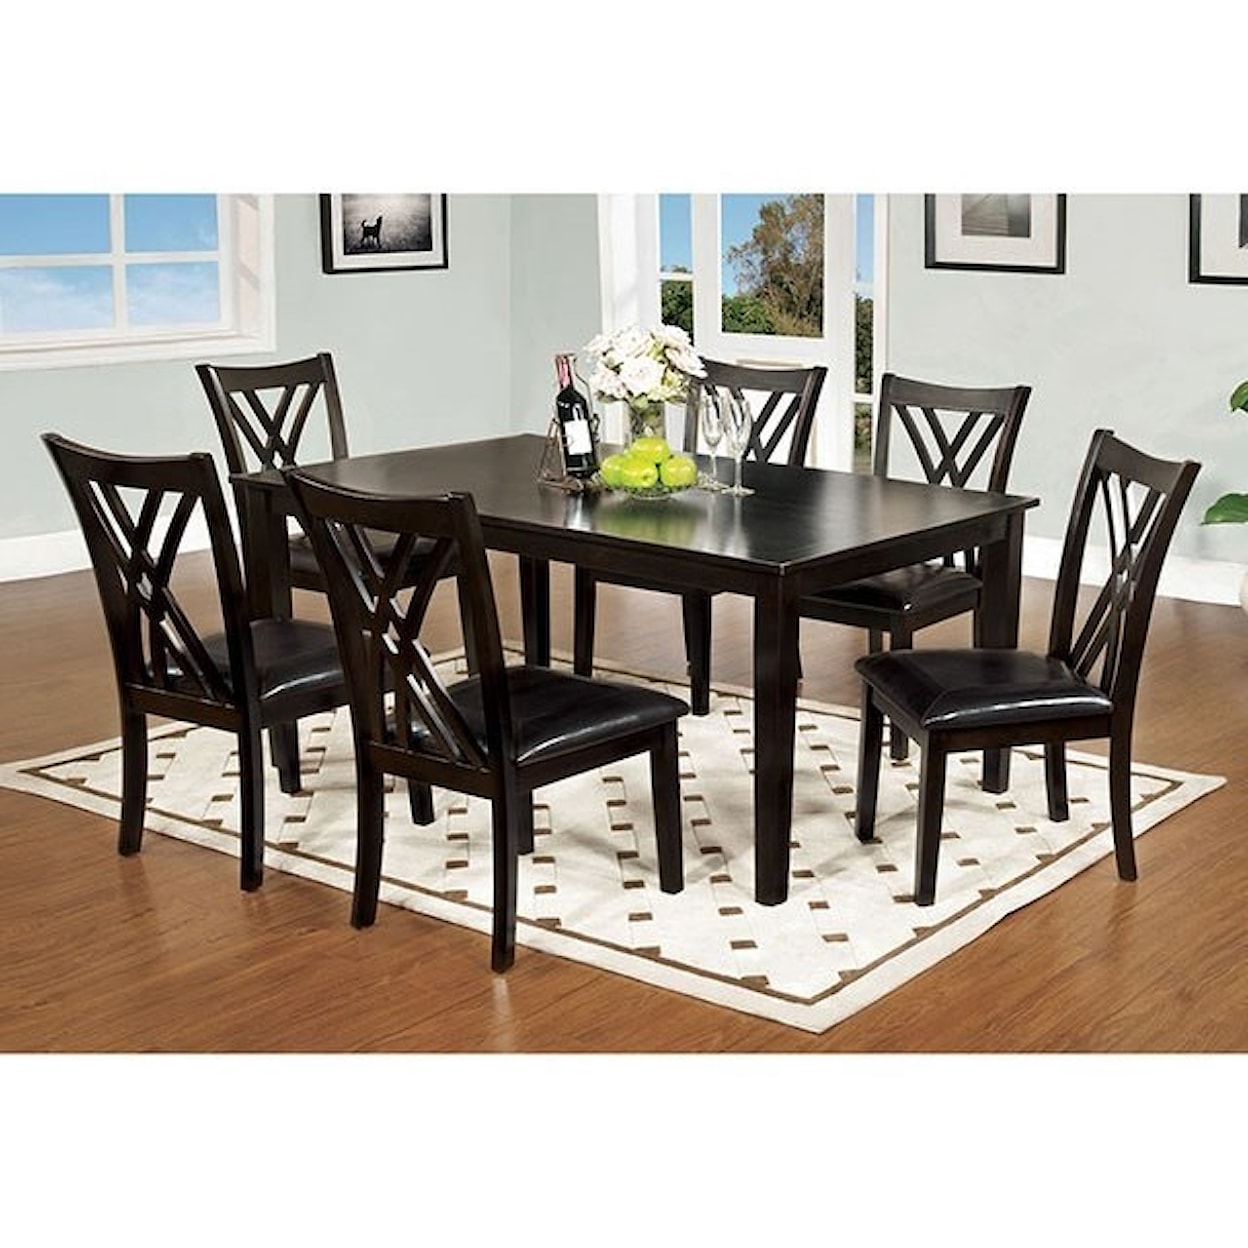 Furniture of America - FOA Springhill 5 Piece Dining Table Set